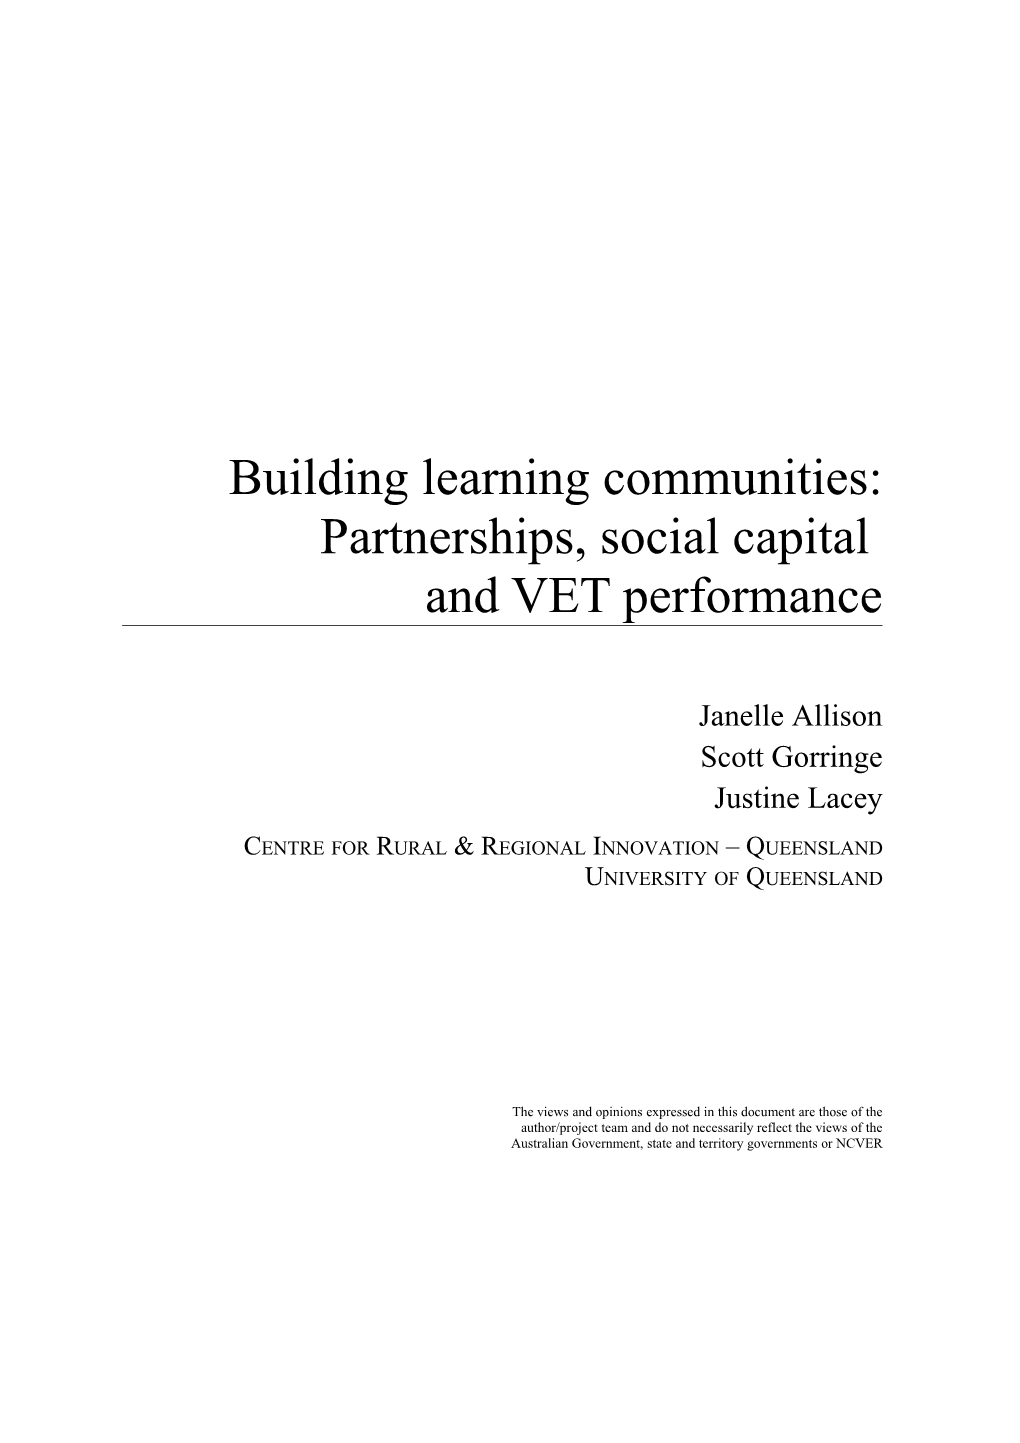 Building Learning Communities: Partnerships, Social Capital and VET Performance